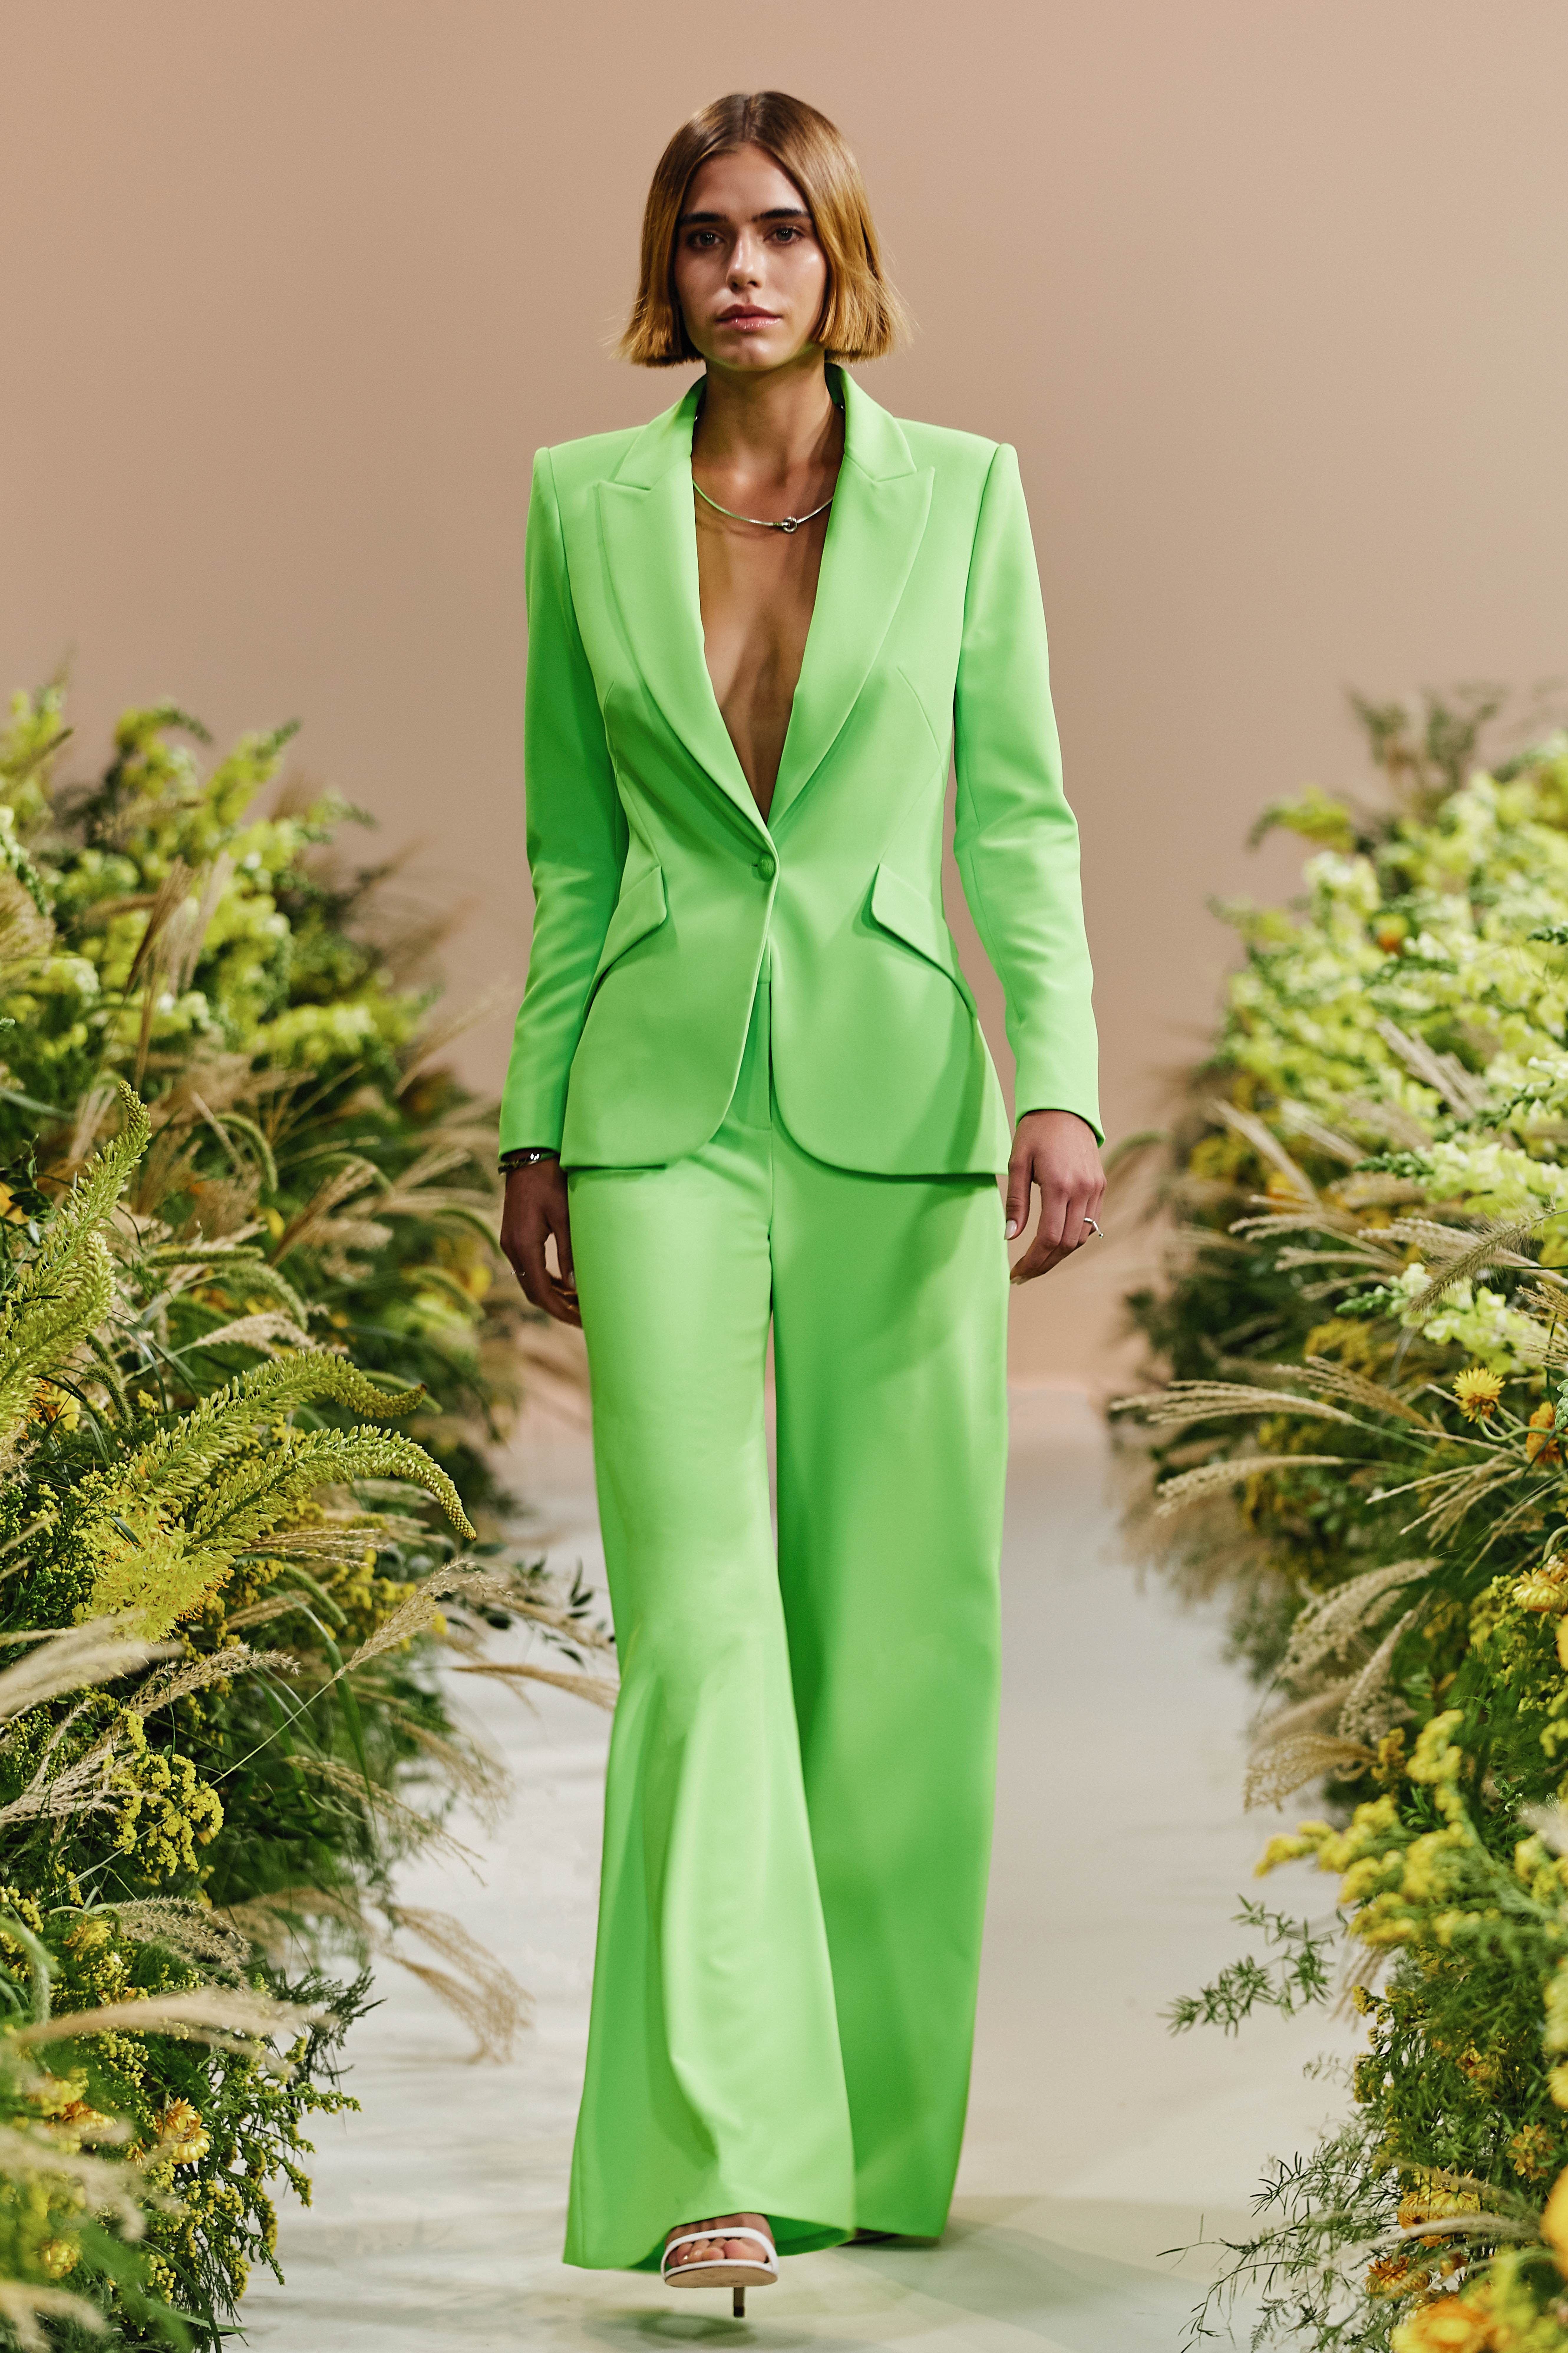 Spring/Summer 2022 Colour Trends: L’Agence debuts a green suit on the runway